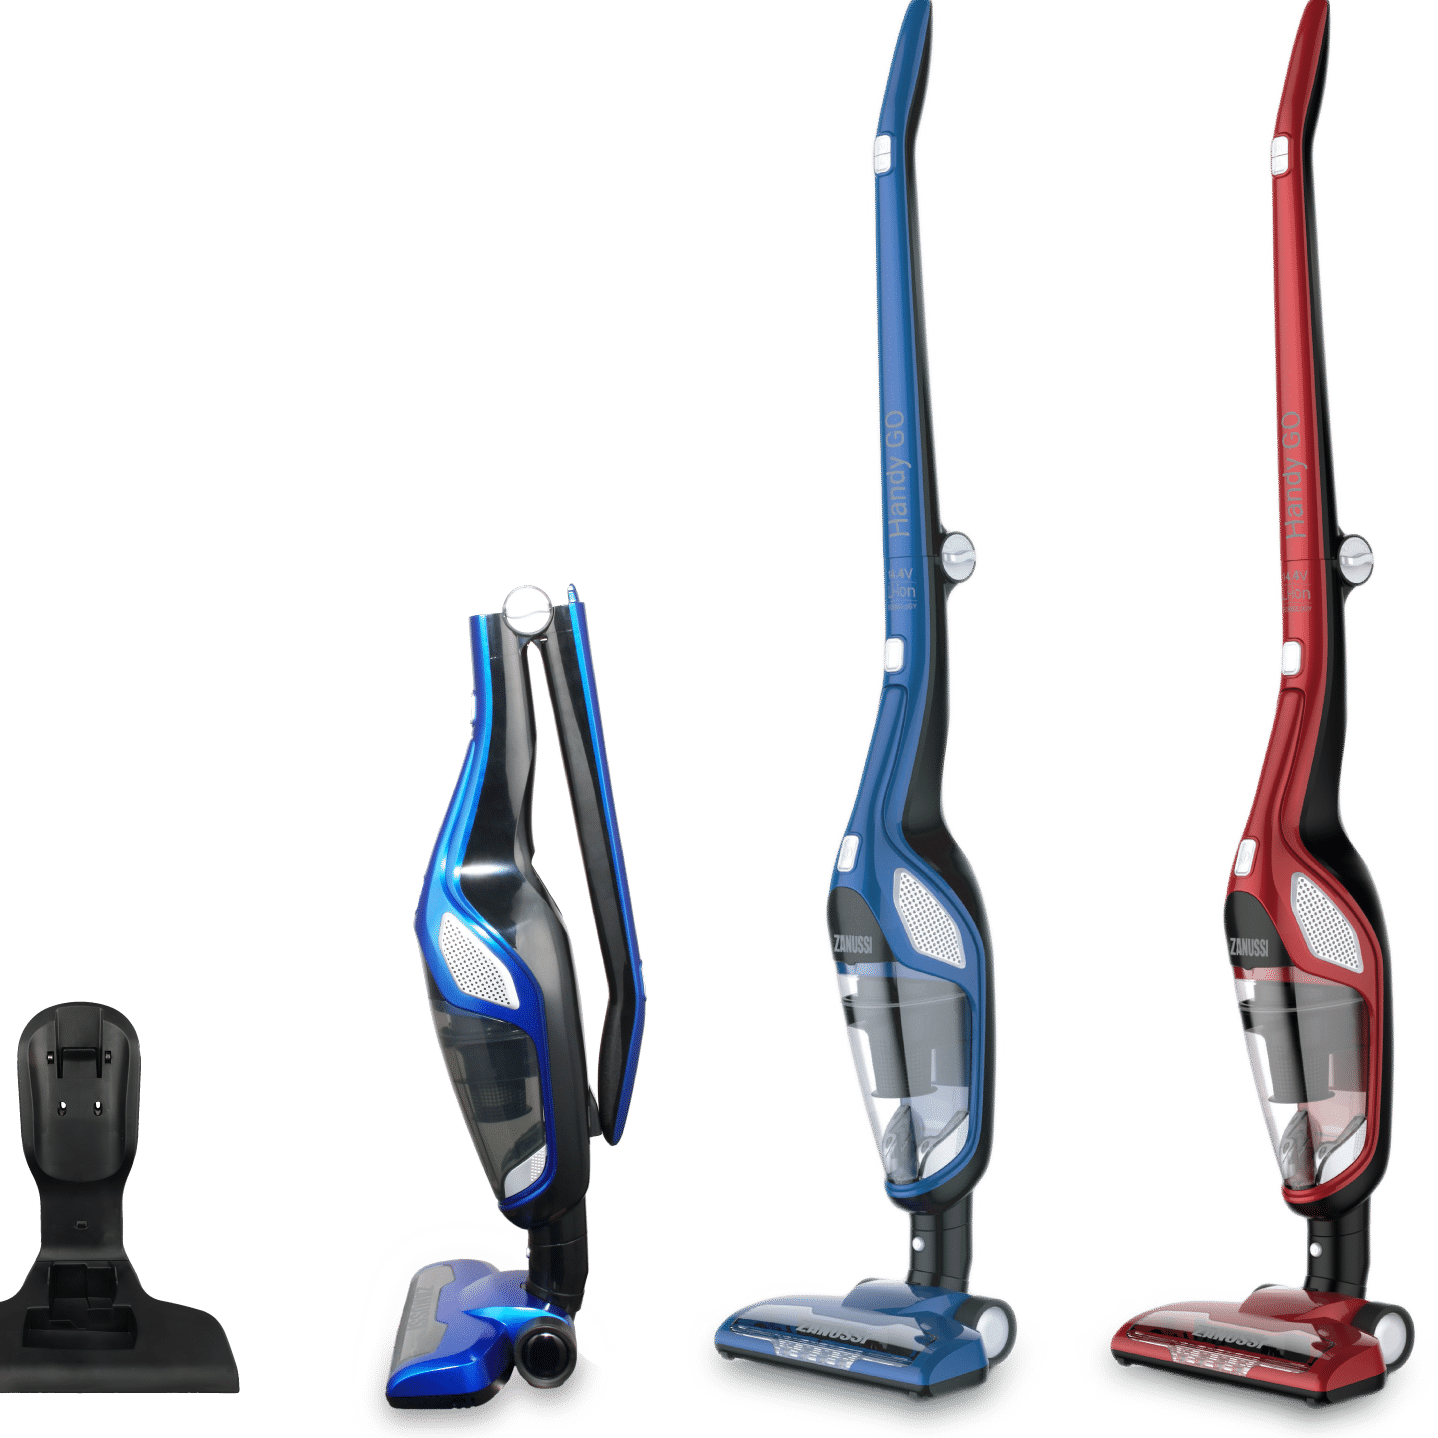 ZANUSSI 2-IN-1 RECHARGEABLE CORDLESS VACUUM CLEANER BLUE ZANDX75BL